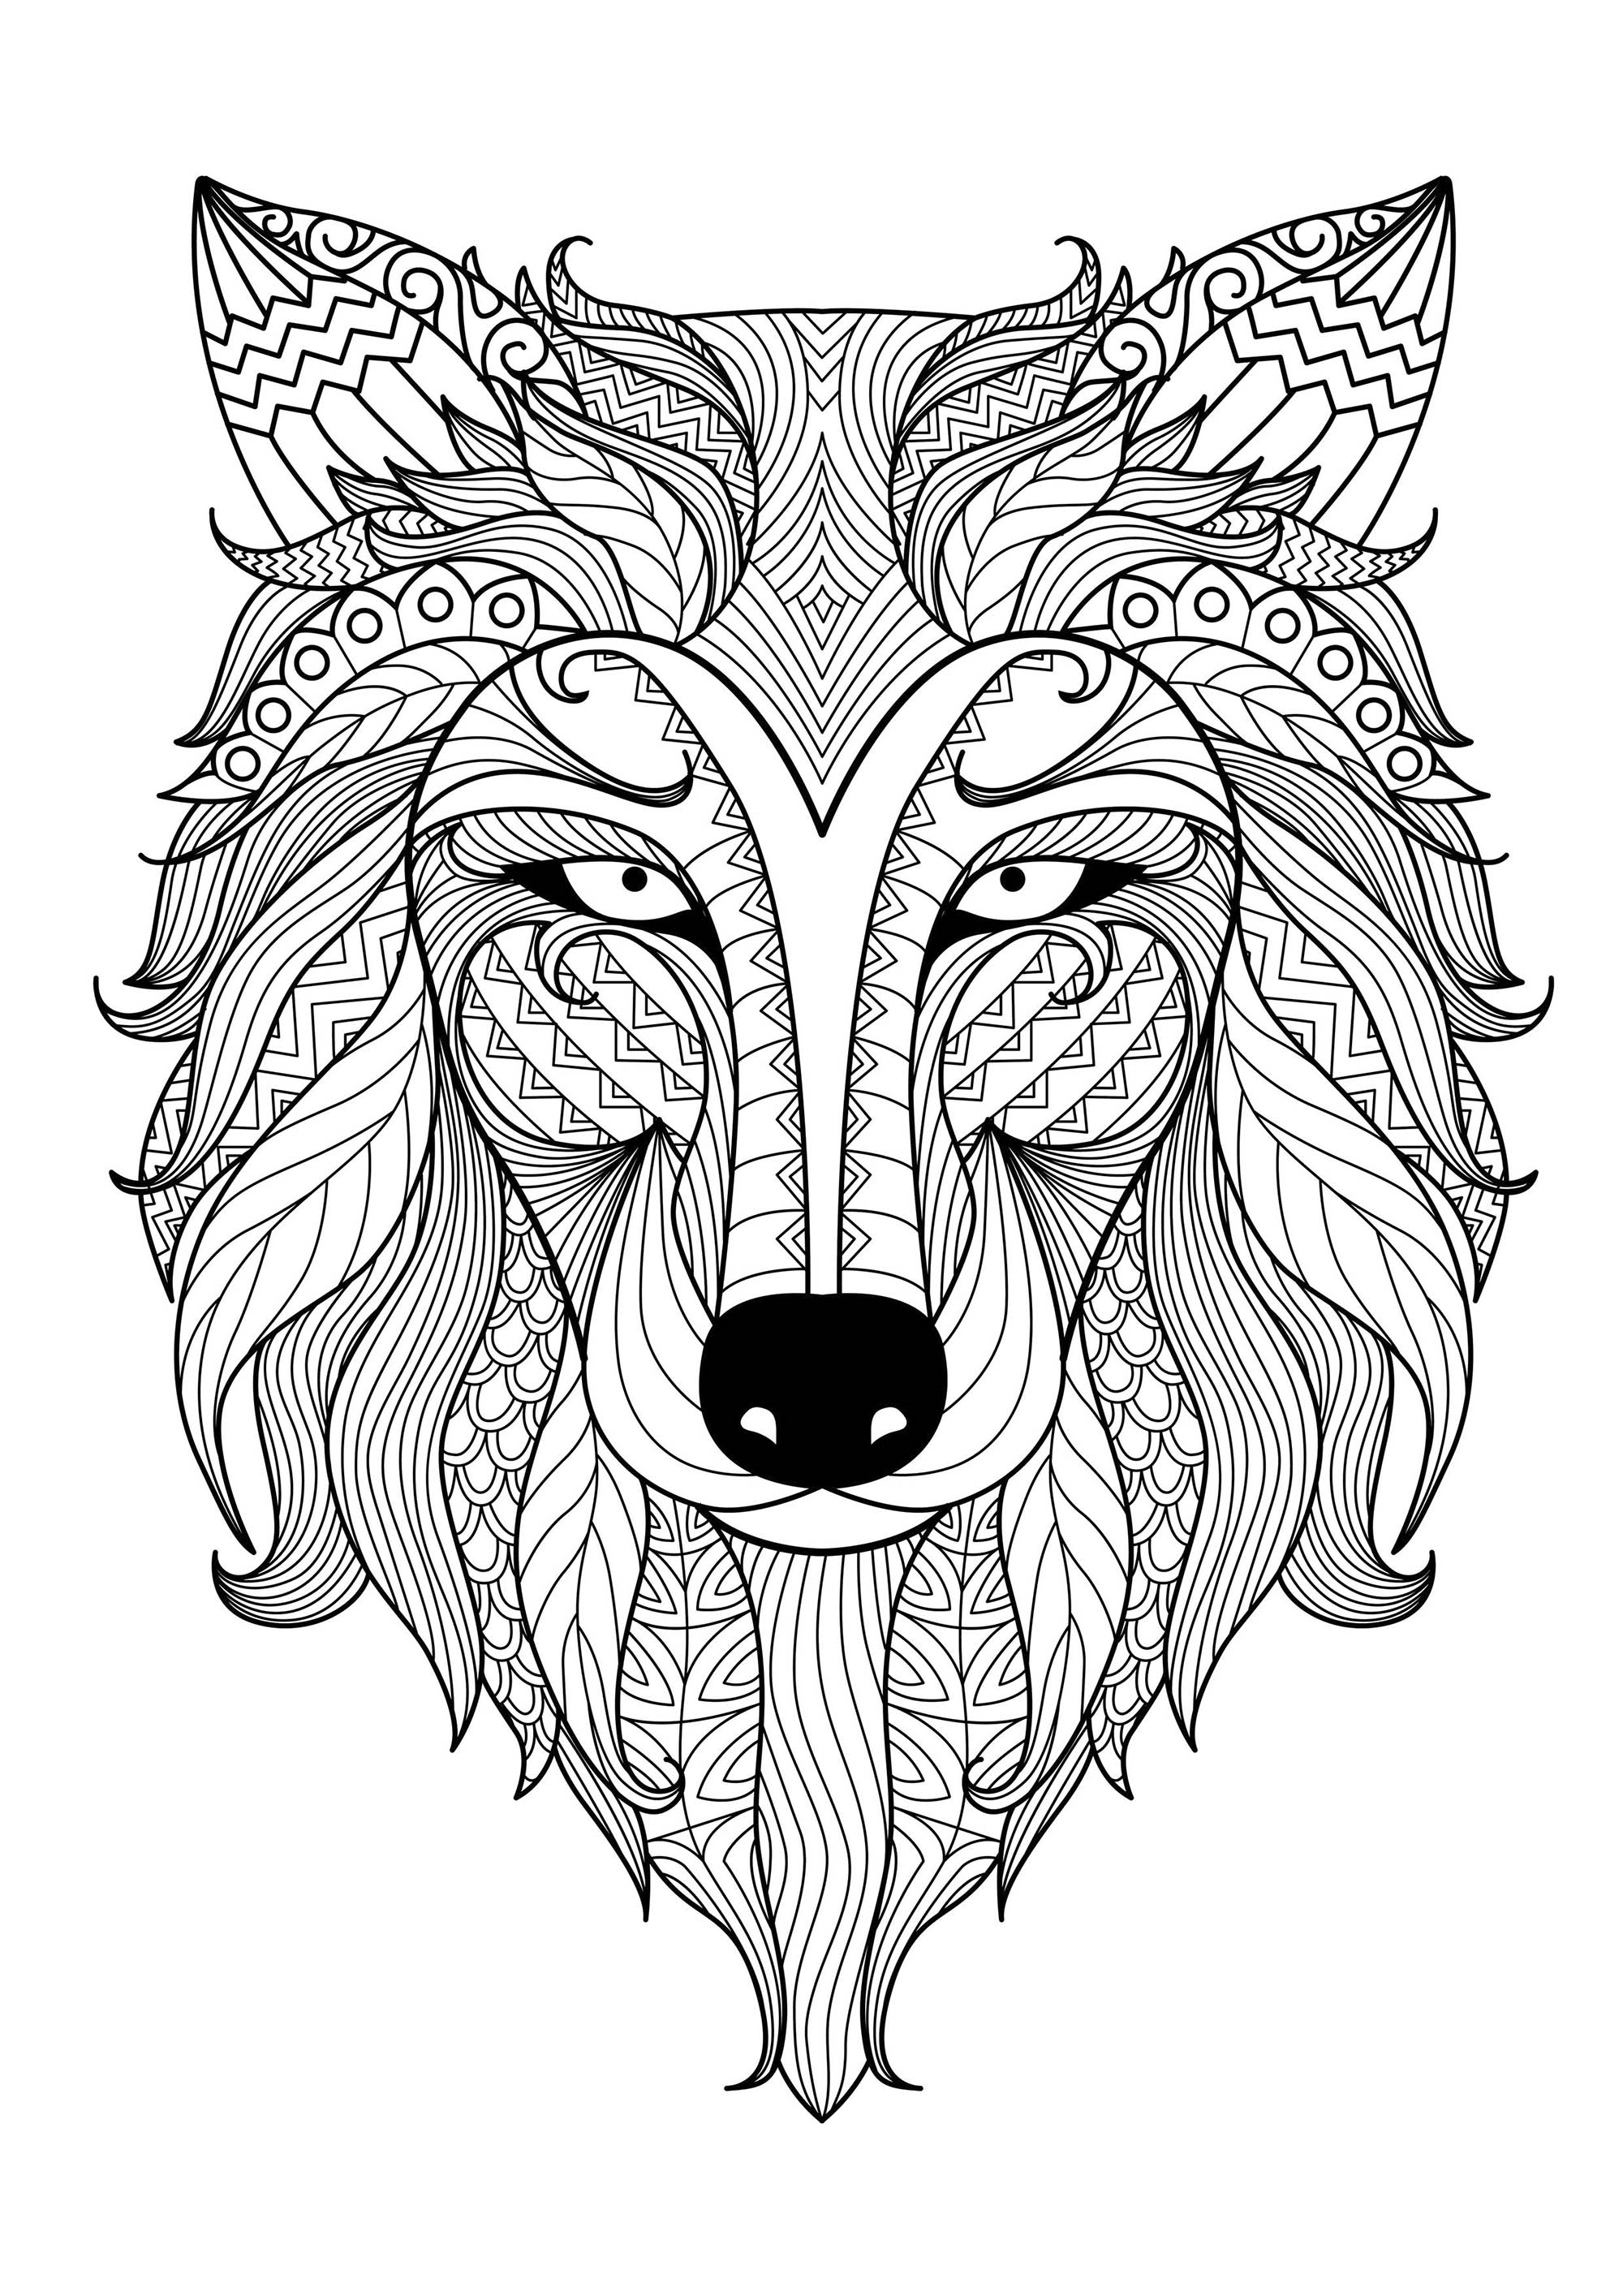 Download Incredible wolf - Wolves Adult Coloring Pages